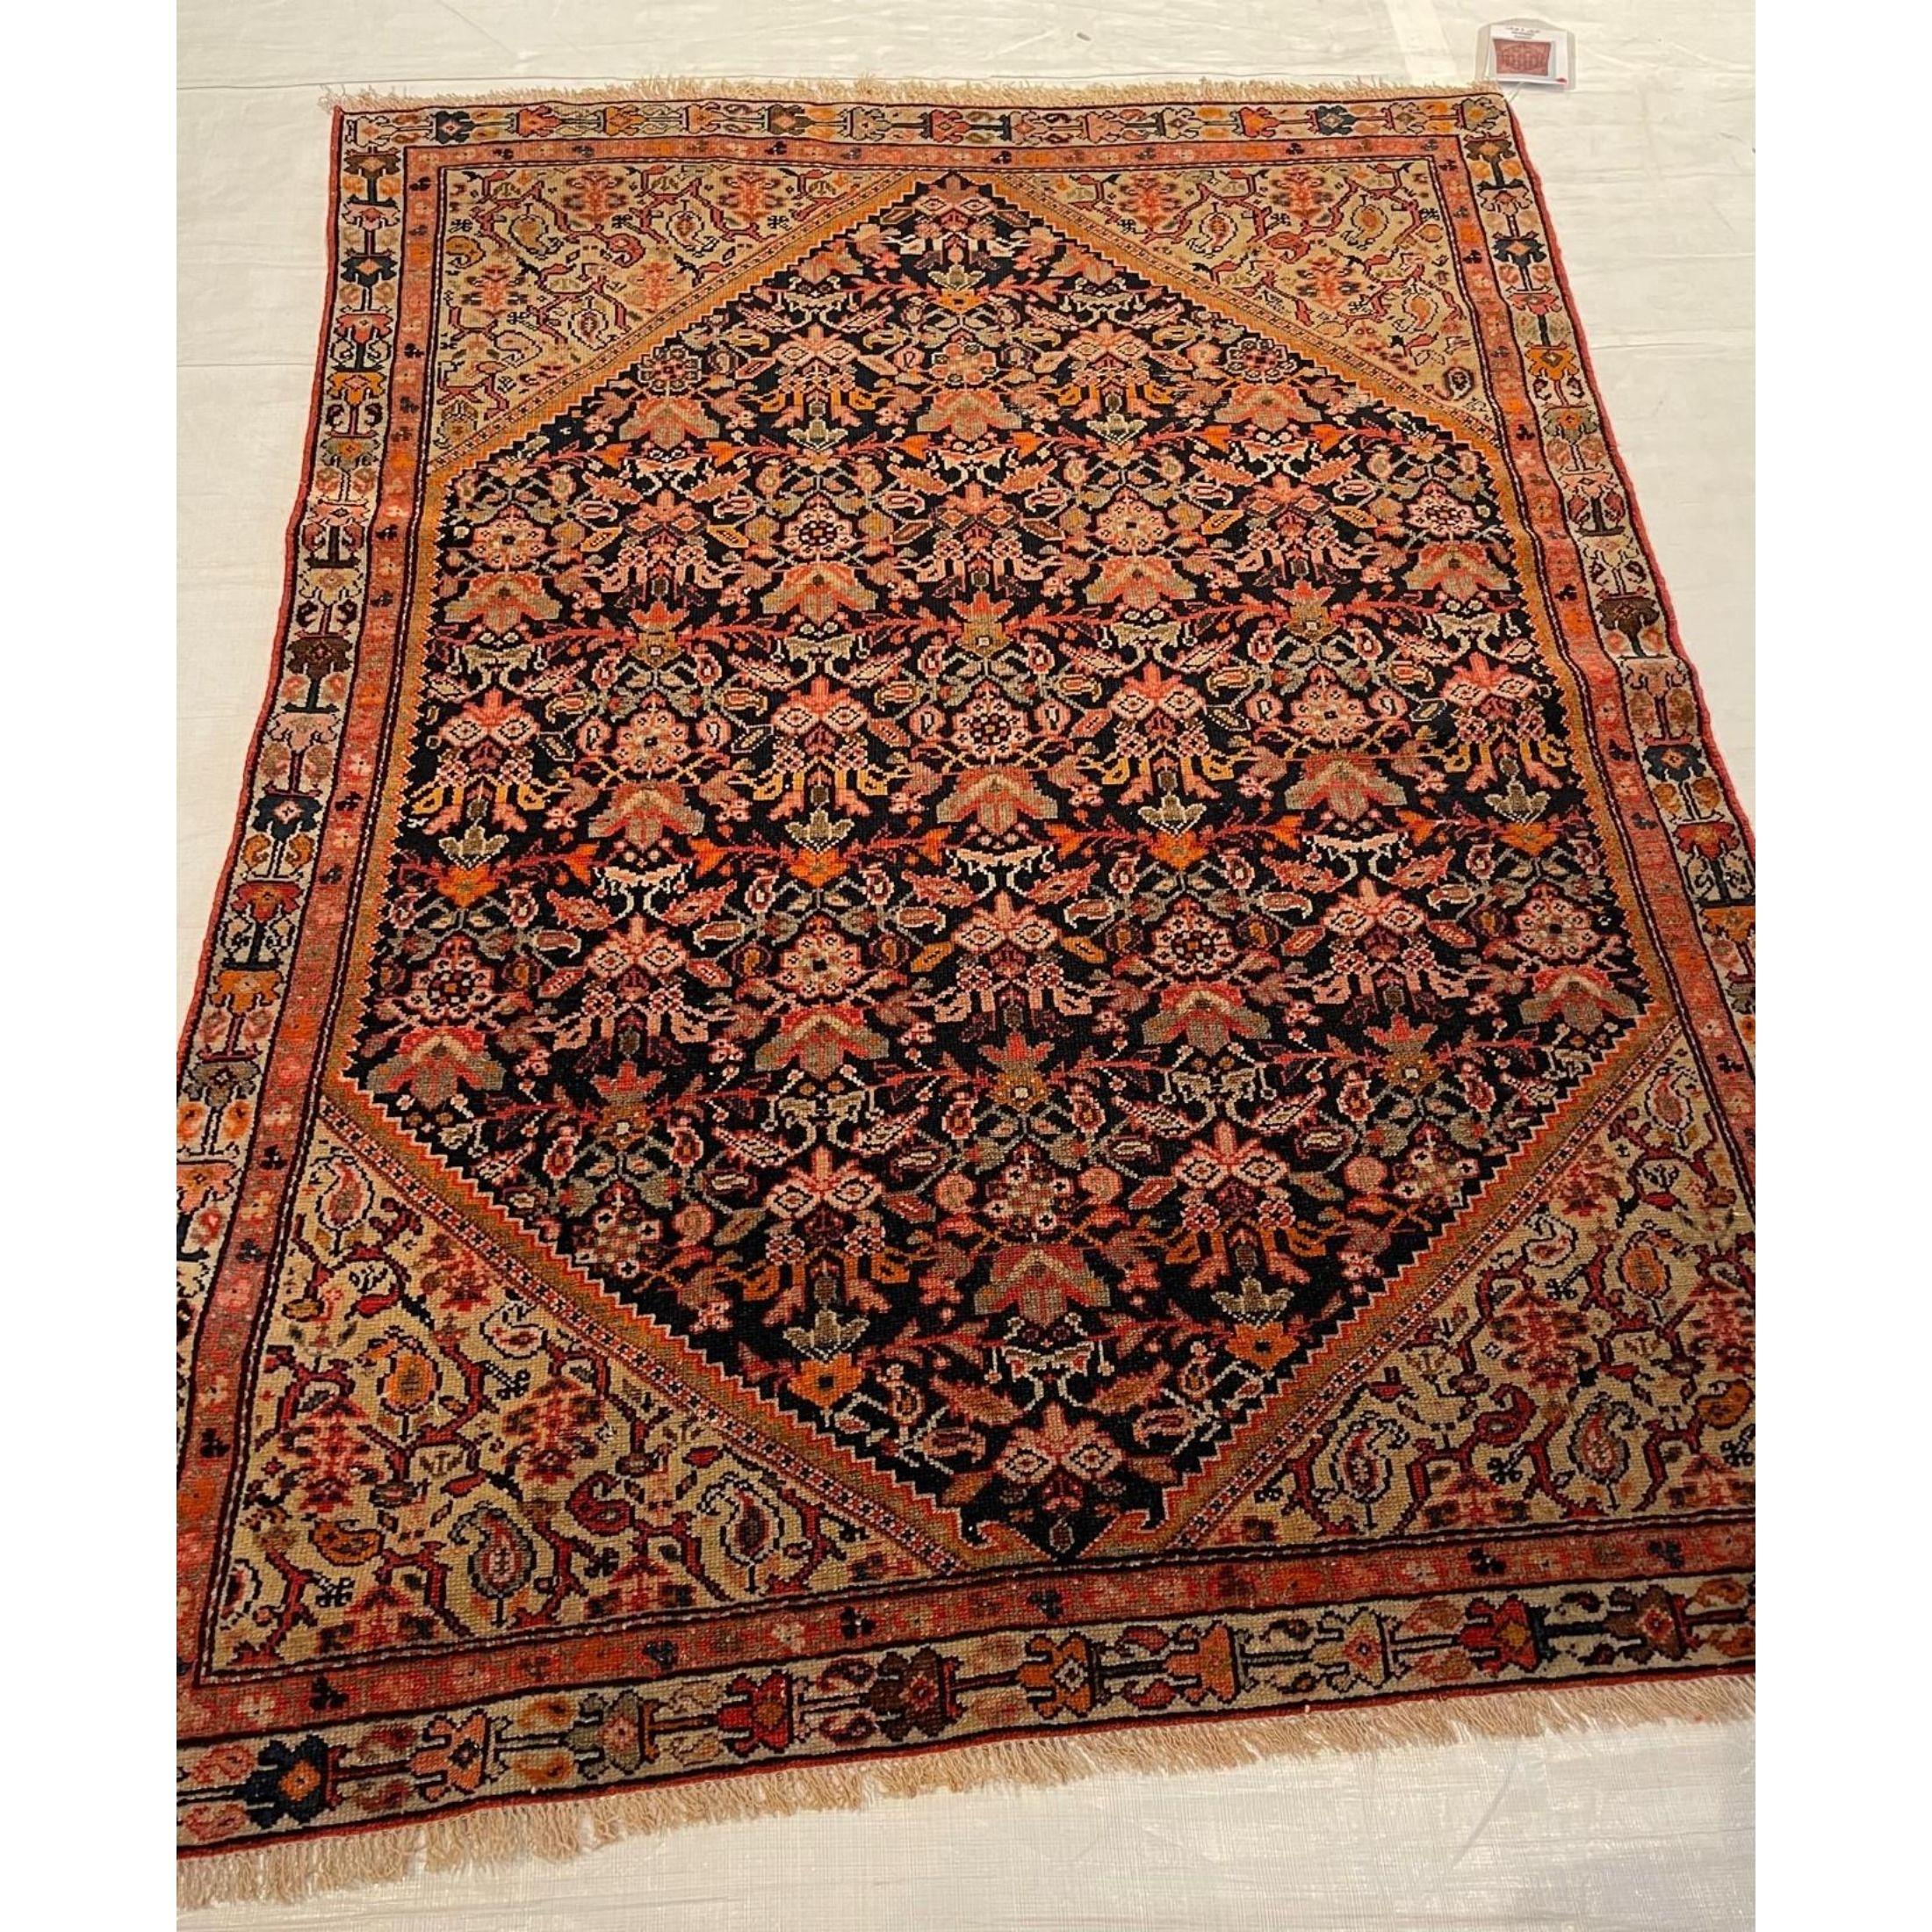 Antique Malayer Rug 4.9 X 3.5 , handmade and hand-knotted, tribal rug , Wool on cotton foundation, authentic Persian Carpet